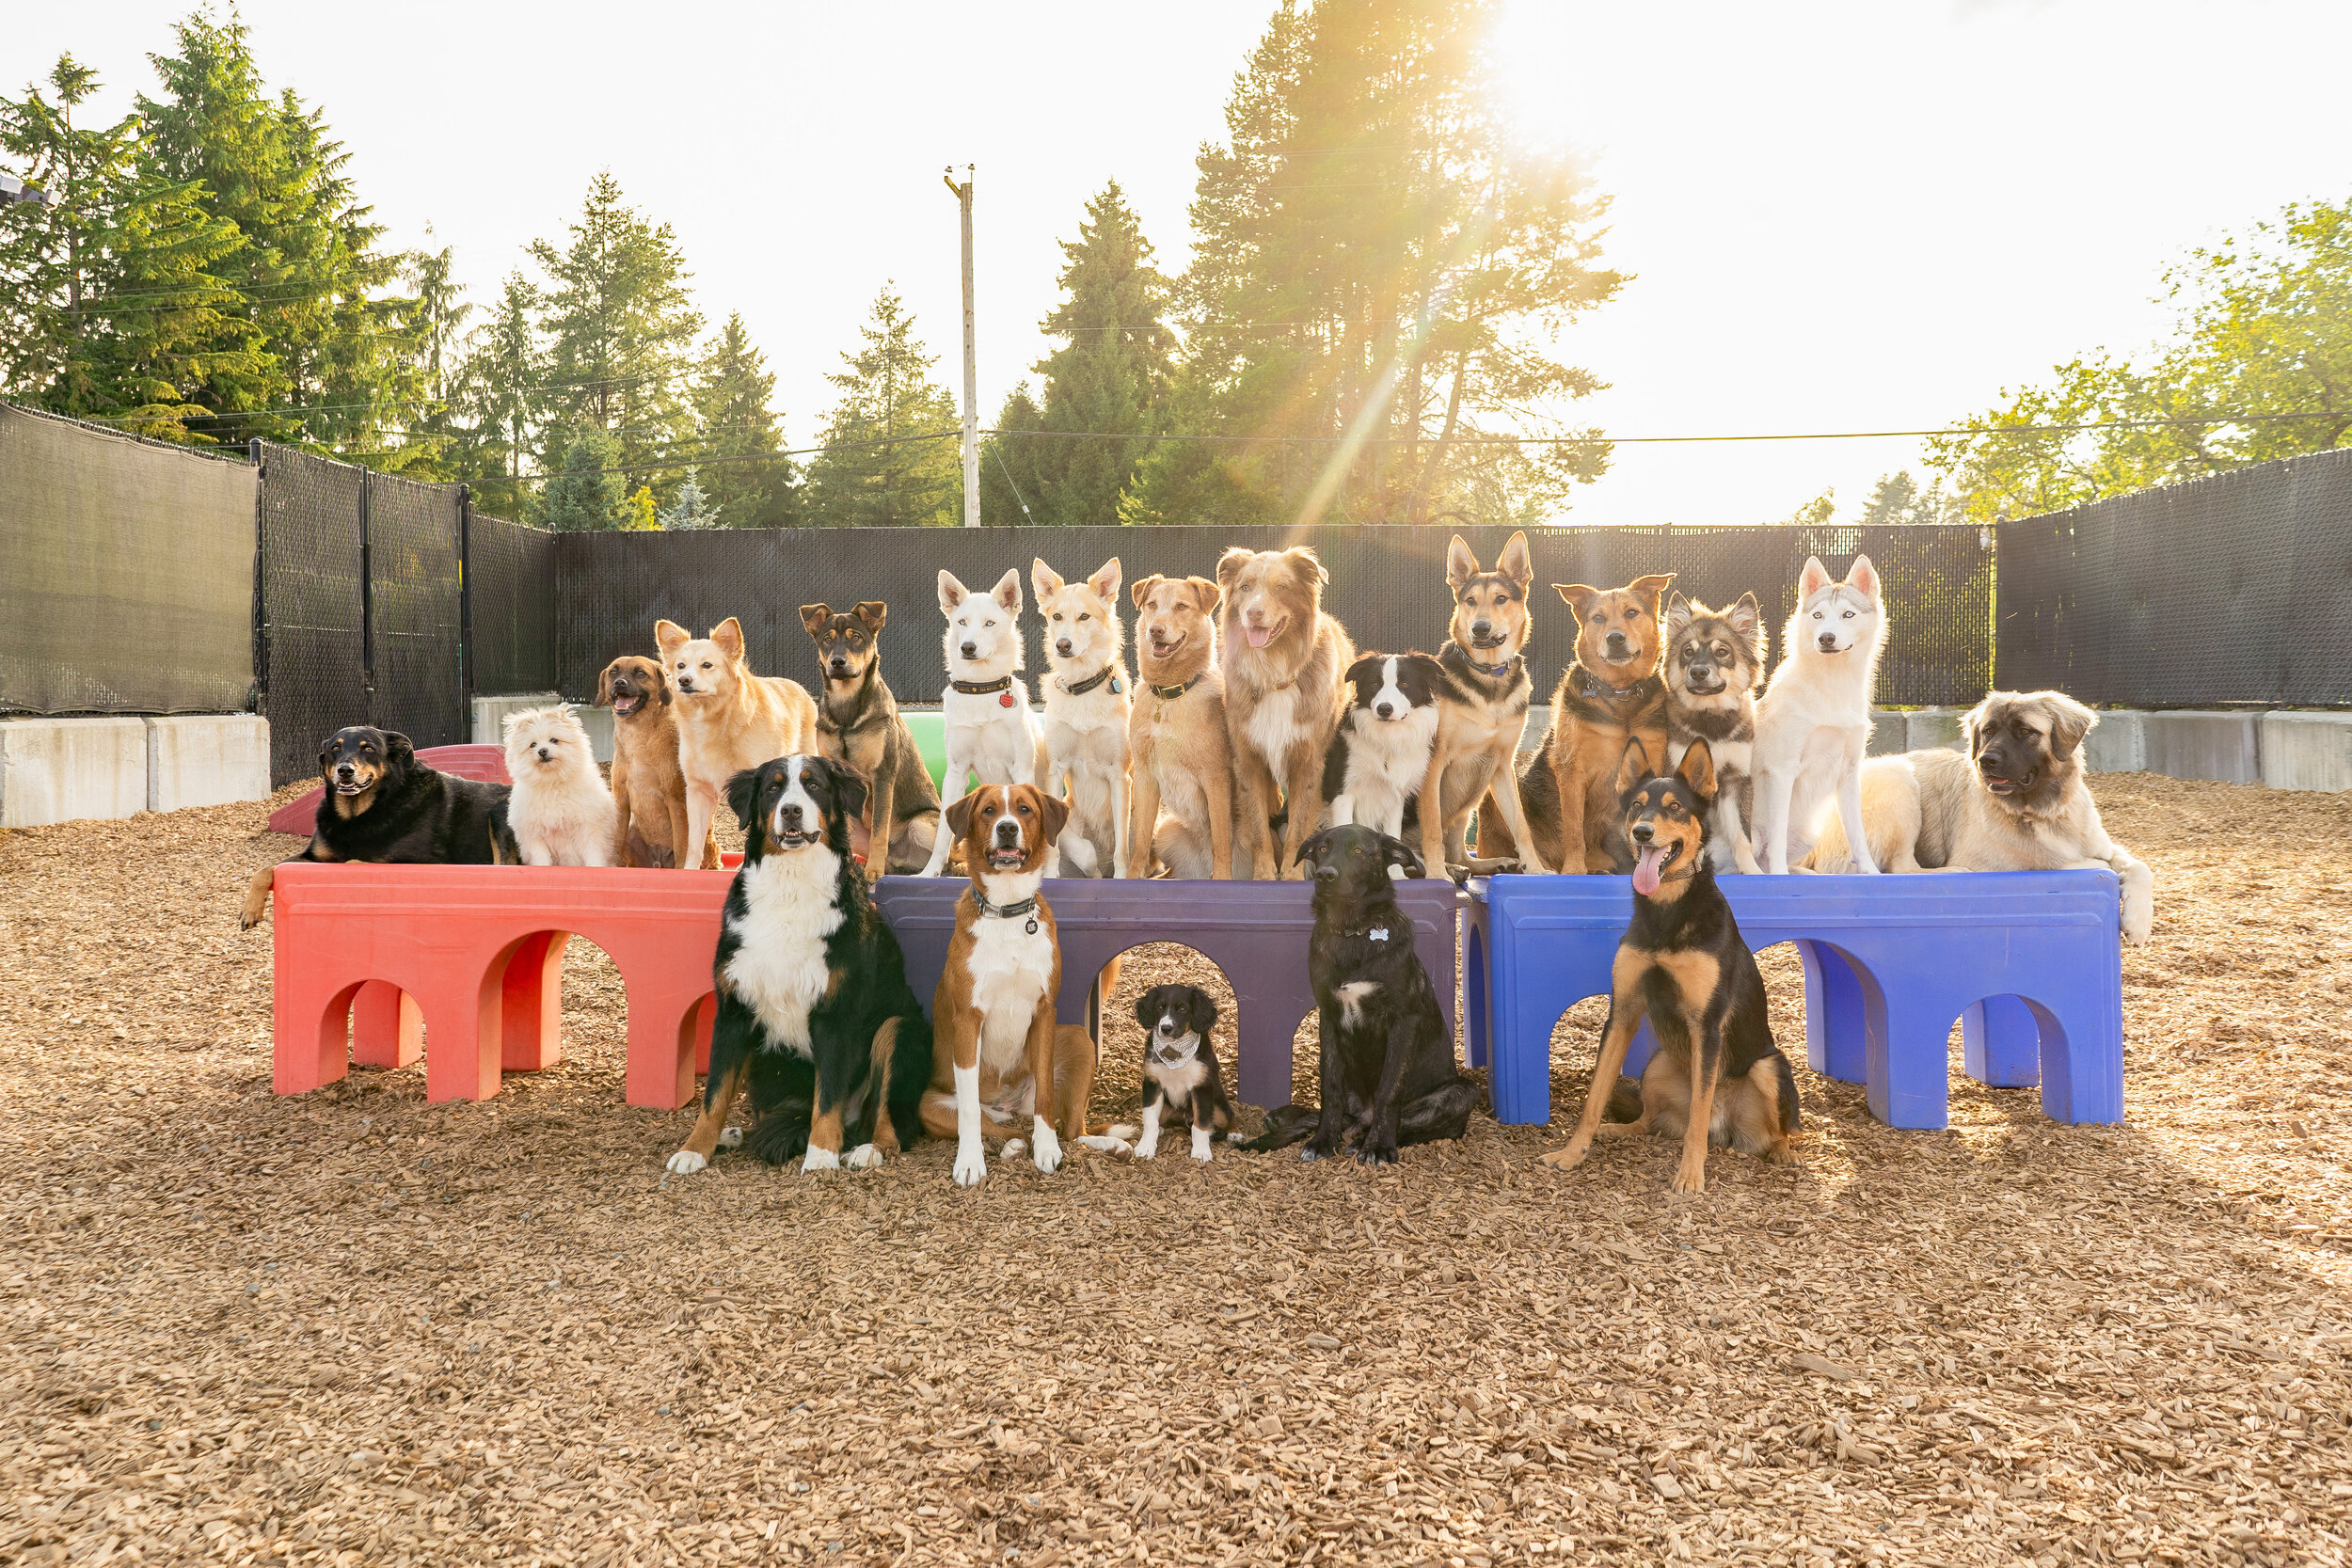 all about dogs daycare